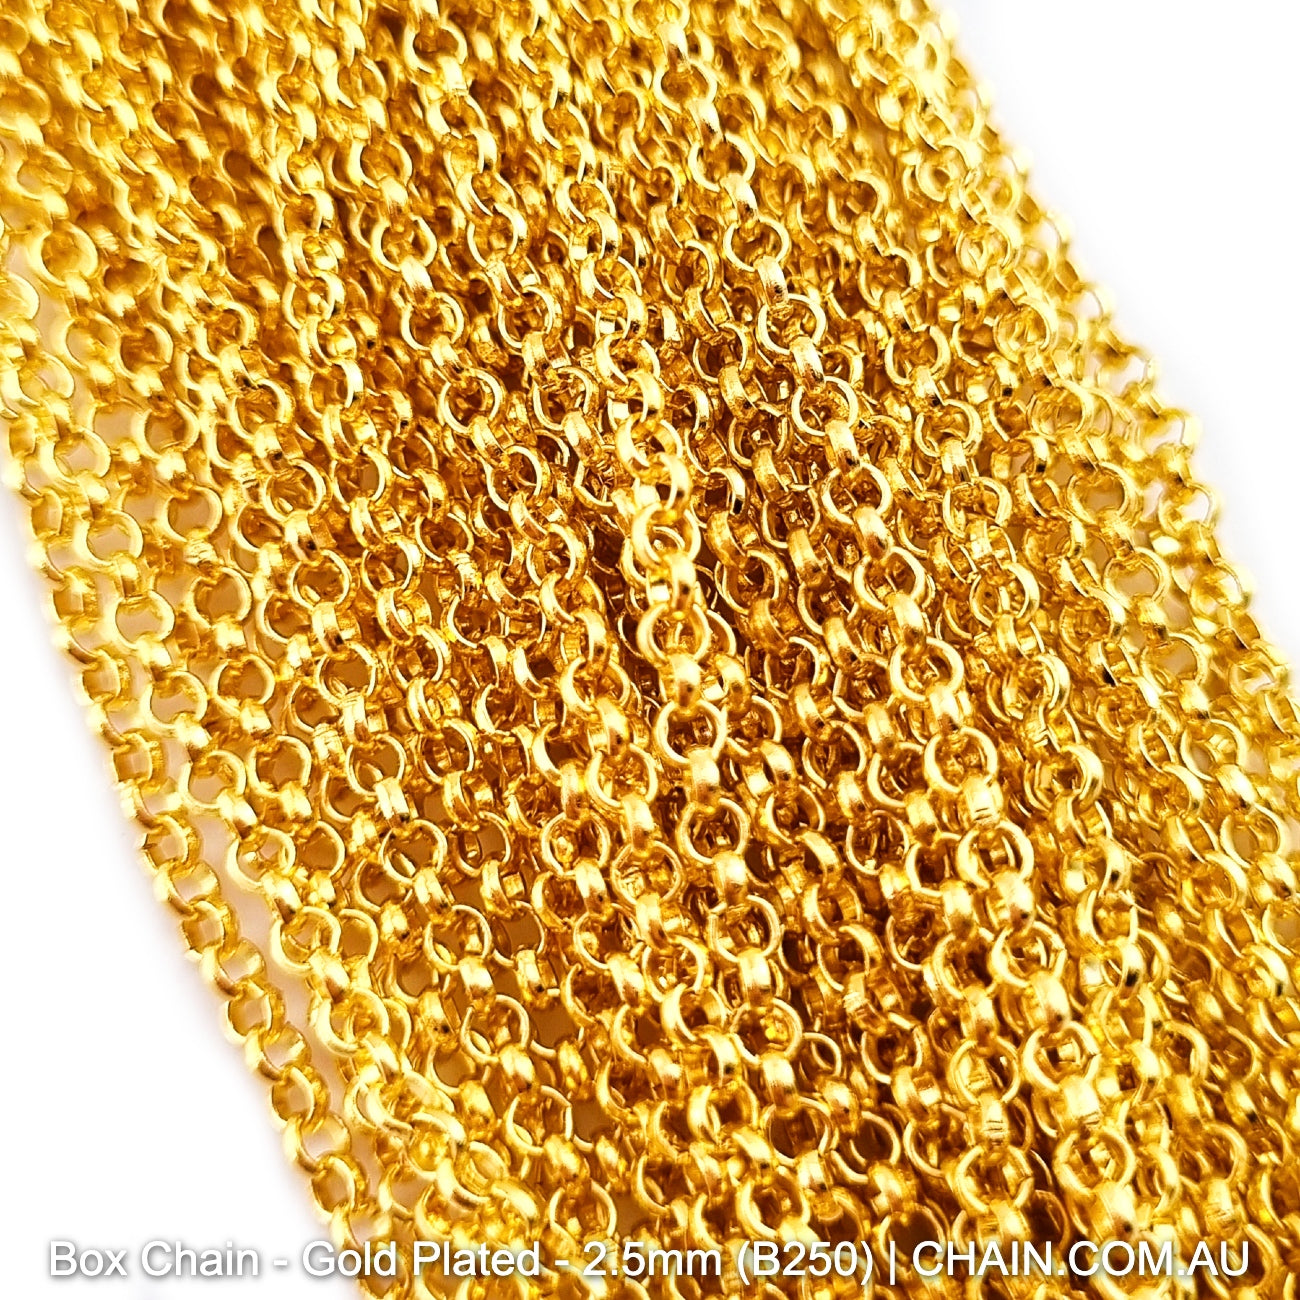 Box Jewellery Chain Gold Plated. Size: 2.5mm x 25m Reel. Shop Jewellery Chain online. Australia wide shipping. Chain.com.au